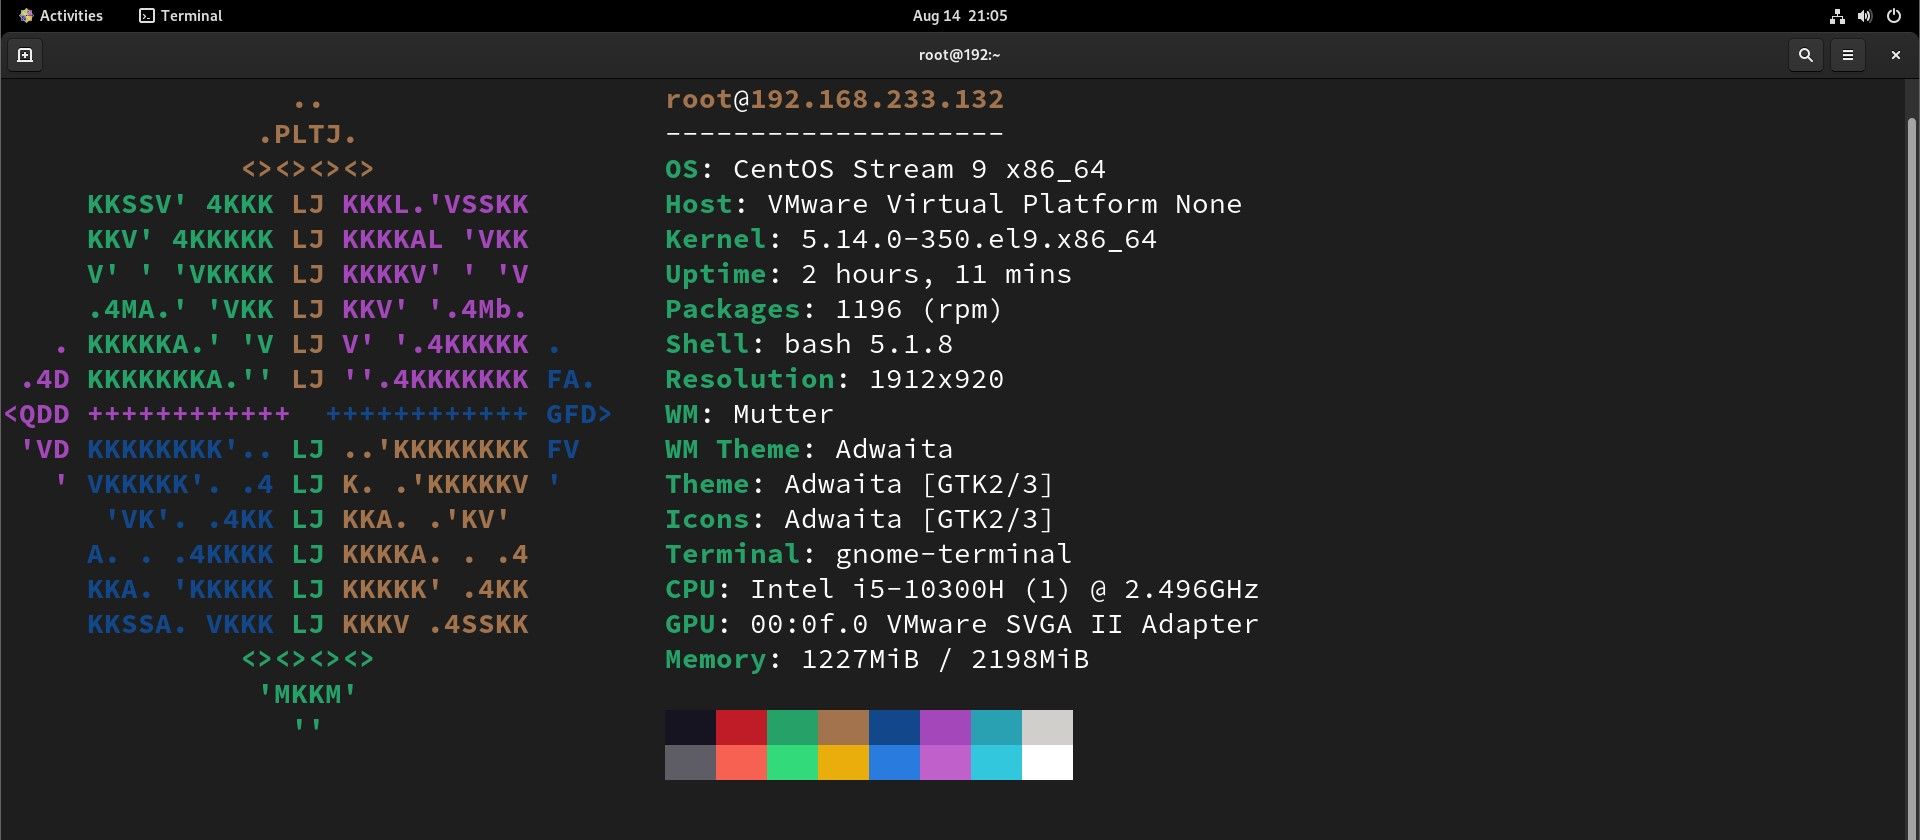 CentOS 9 OS properties listed in terminal window